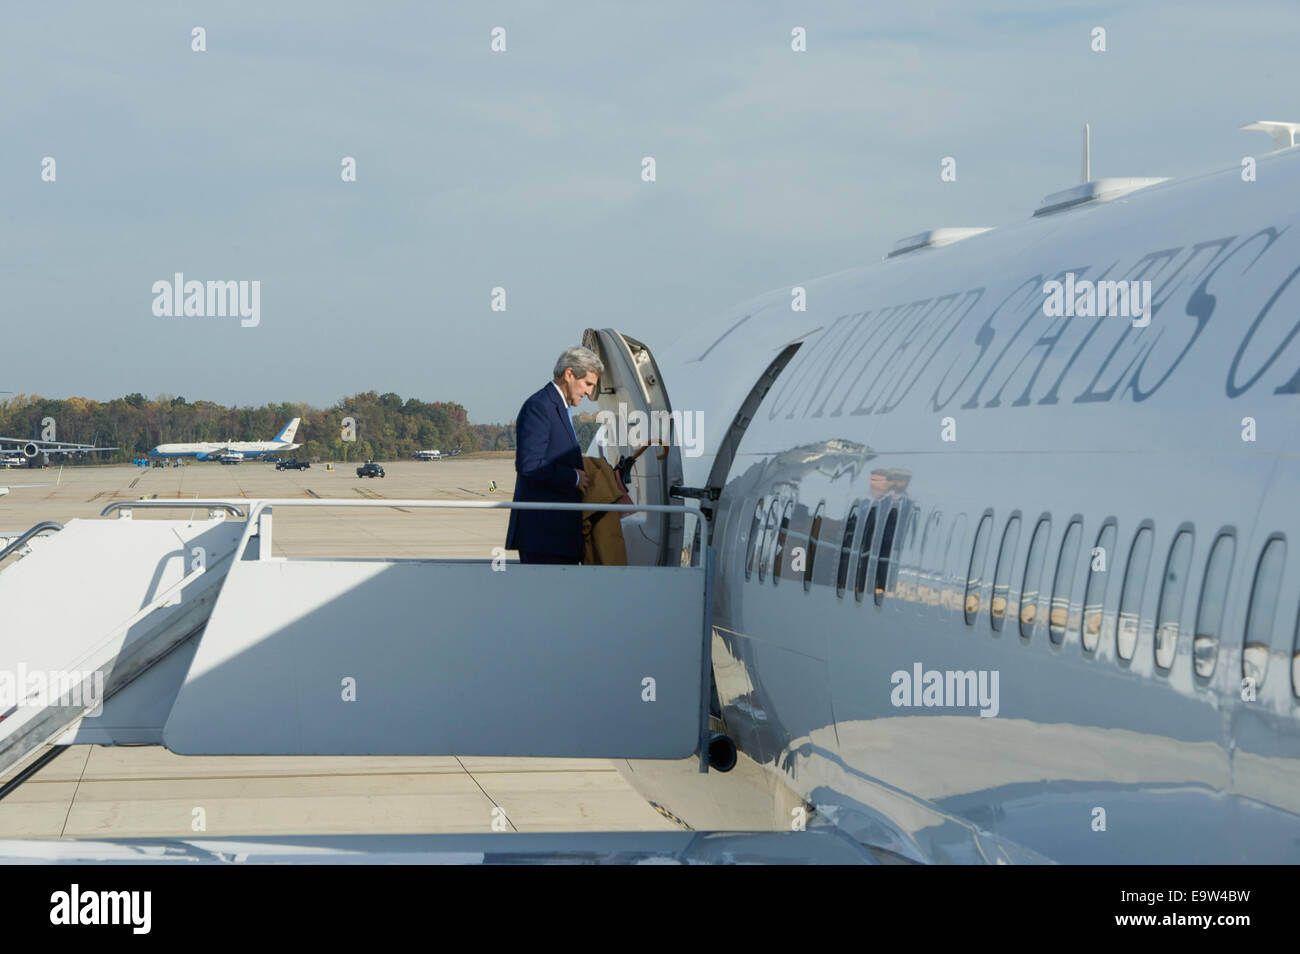 U.S. Secretary of State John Kerry boards his plane at Andrews Air Force Base in suburban Washington as he heads to Ottawa, Canada, on Oct. 28, 2014. Secretary Kerry is traveling to Canada to extend his condolences in the aftermath of last week's shooting Stock Photo